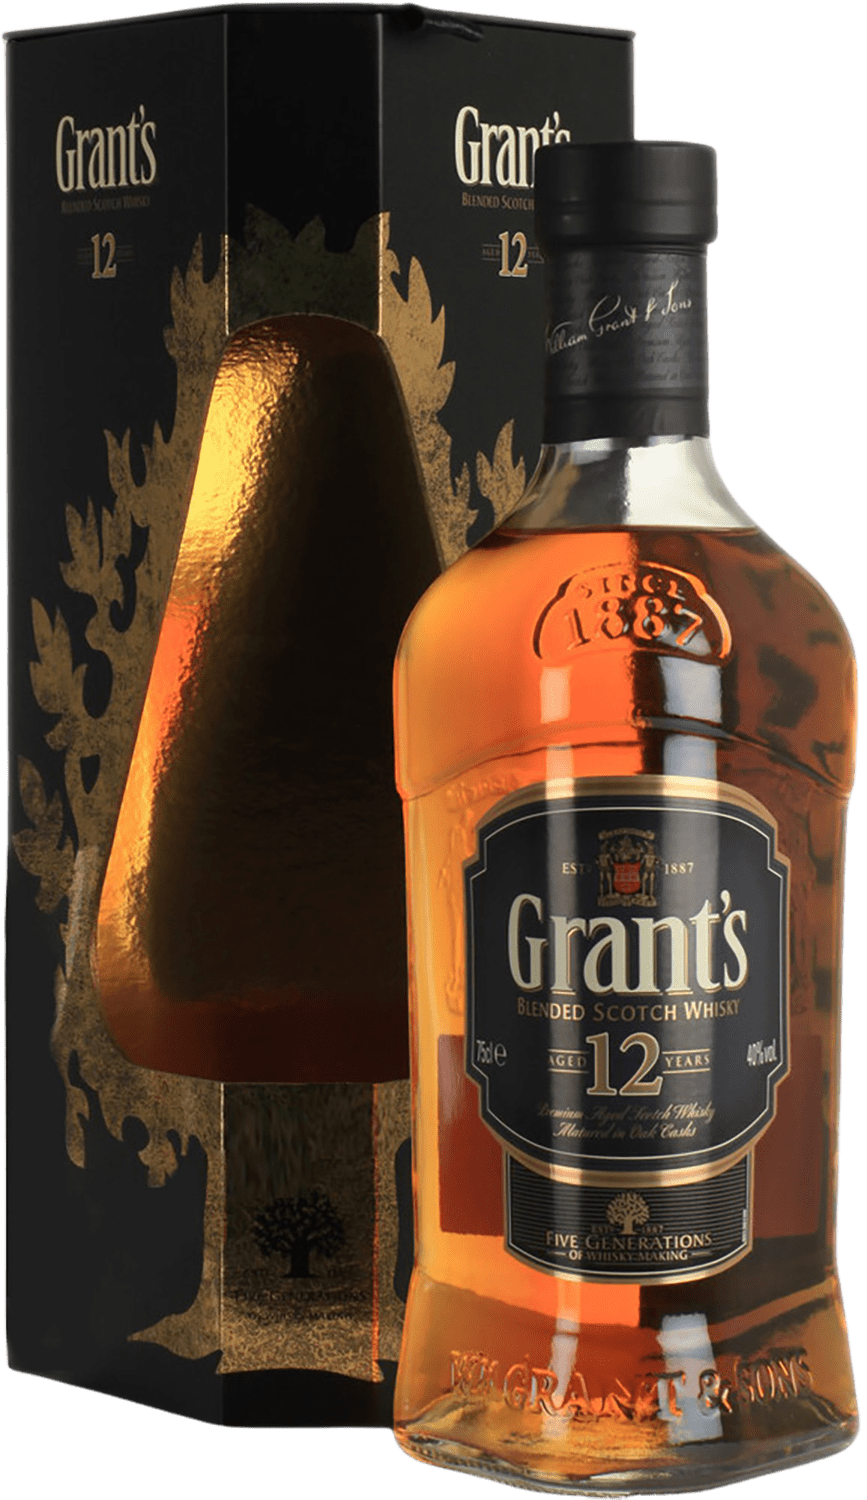 Grant's 12 y.o. Blended Scotch Whisky (gift box) dewar s special reserve 12 y o blended scotch whiskey gift box